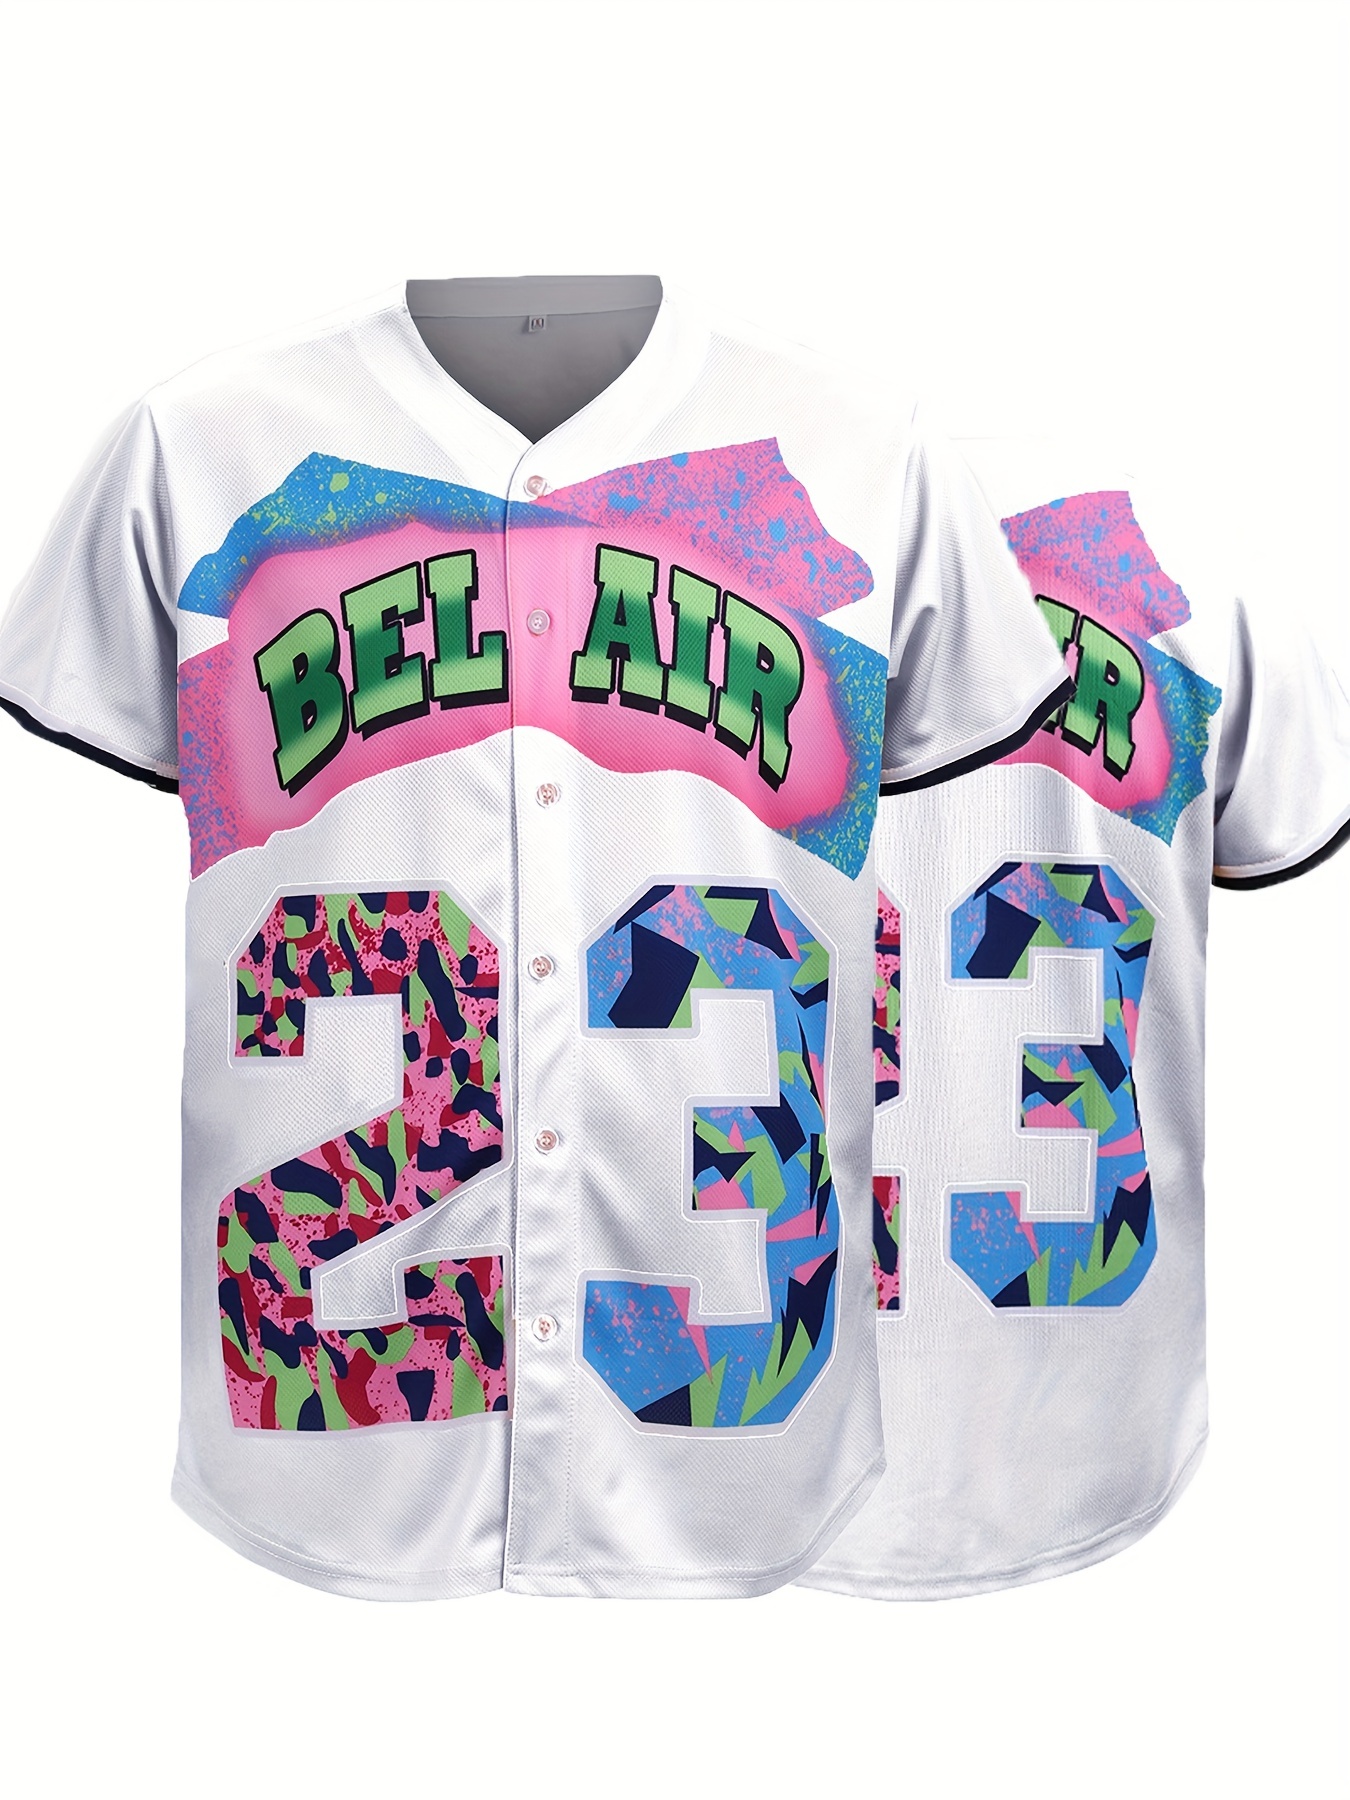  Bel Air 23 Baseball Jersey Outfit for Women and Men, Unisex  Short Sleeve Baseball Top Shirt Uniform for Party, Club and Pub : Clothing